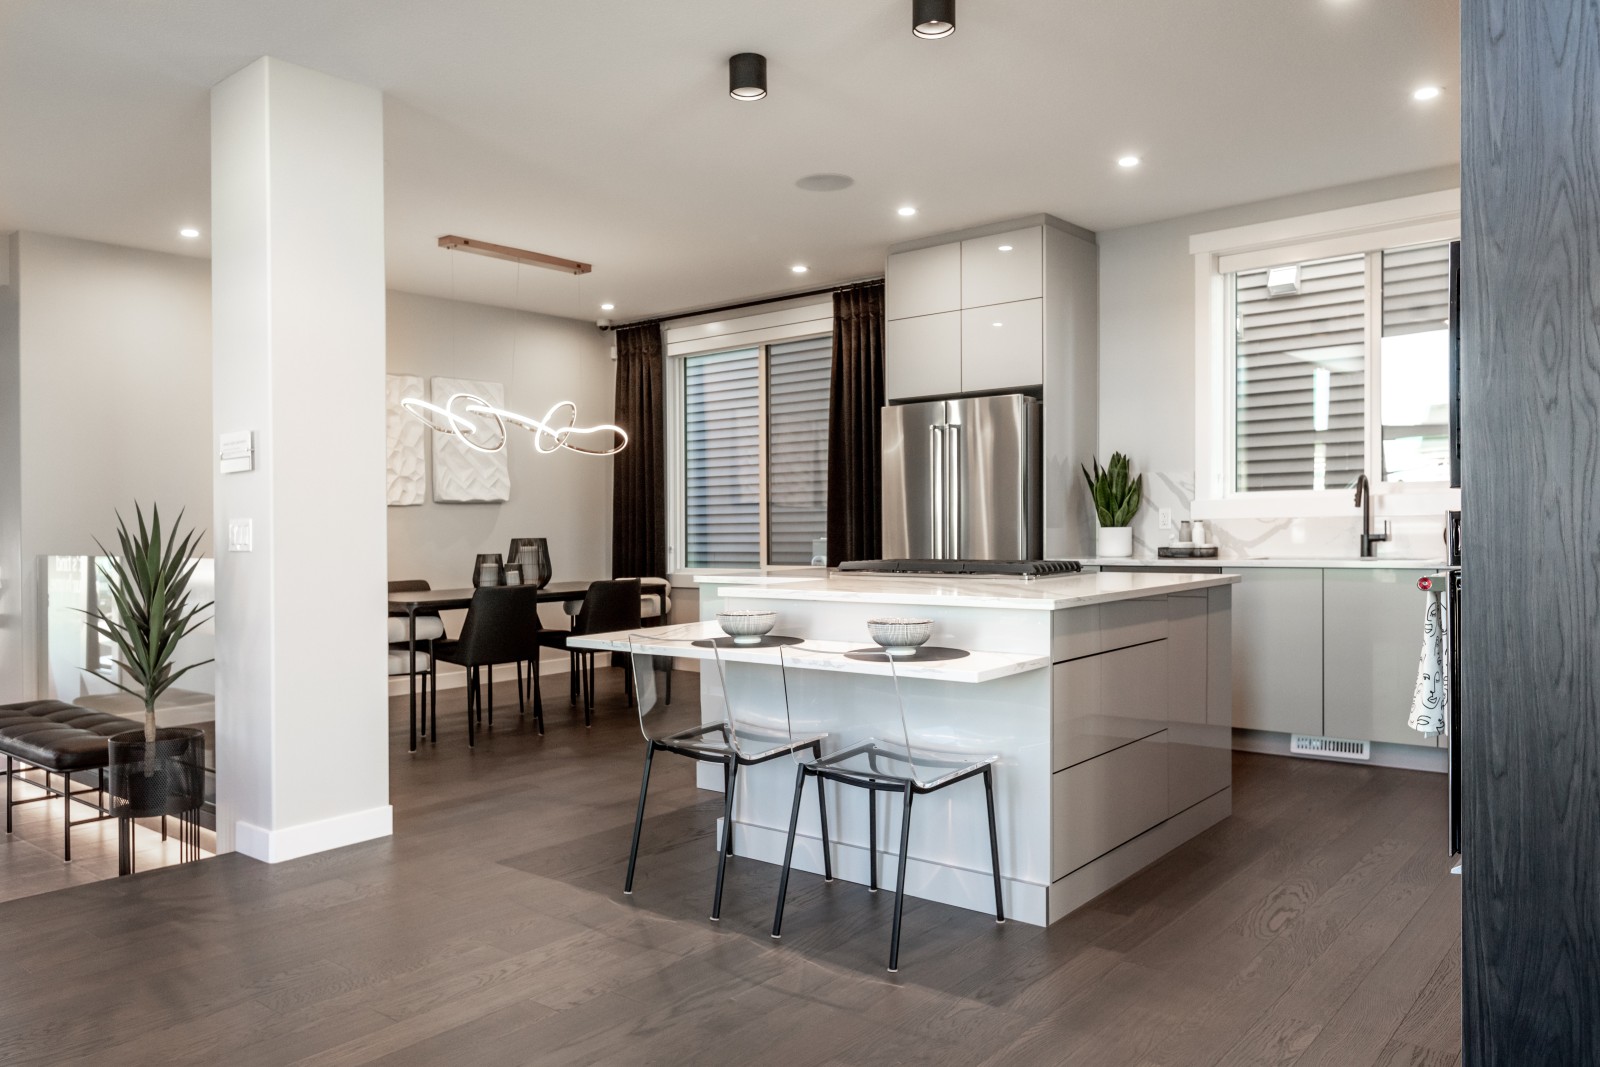 The sleek and modern kitchen of the Cyrus showhome featuring grey acrylic cabinets, white quartz countertops and a custom dropped eating bar at the island